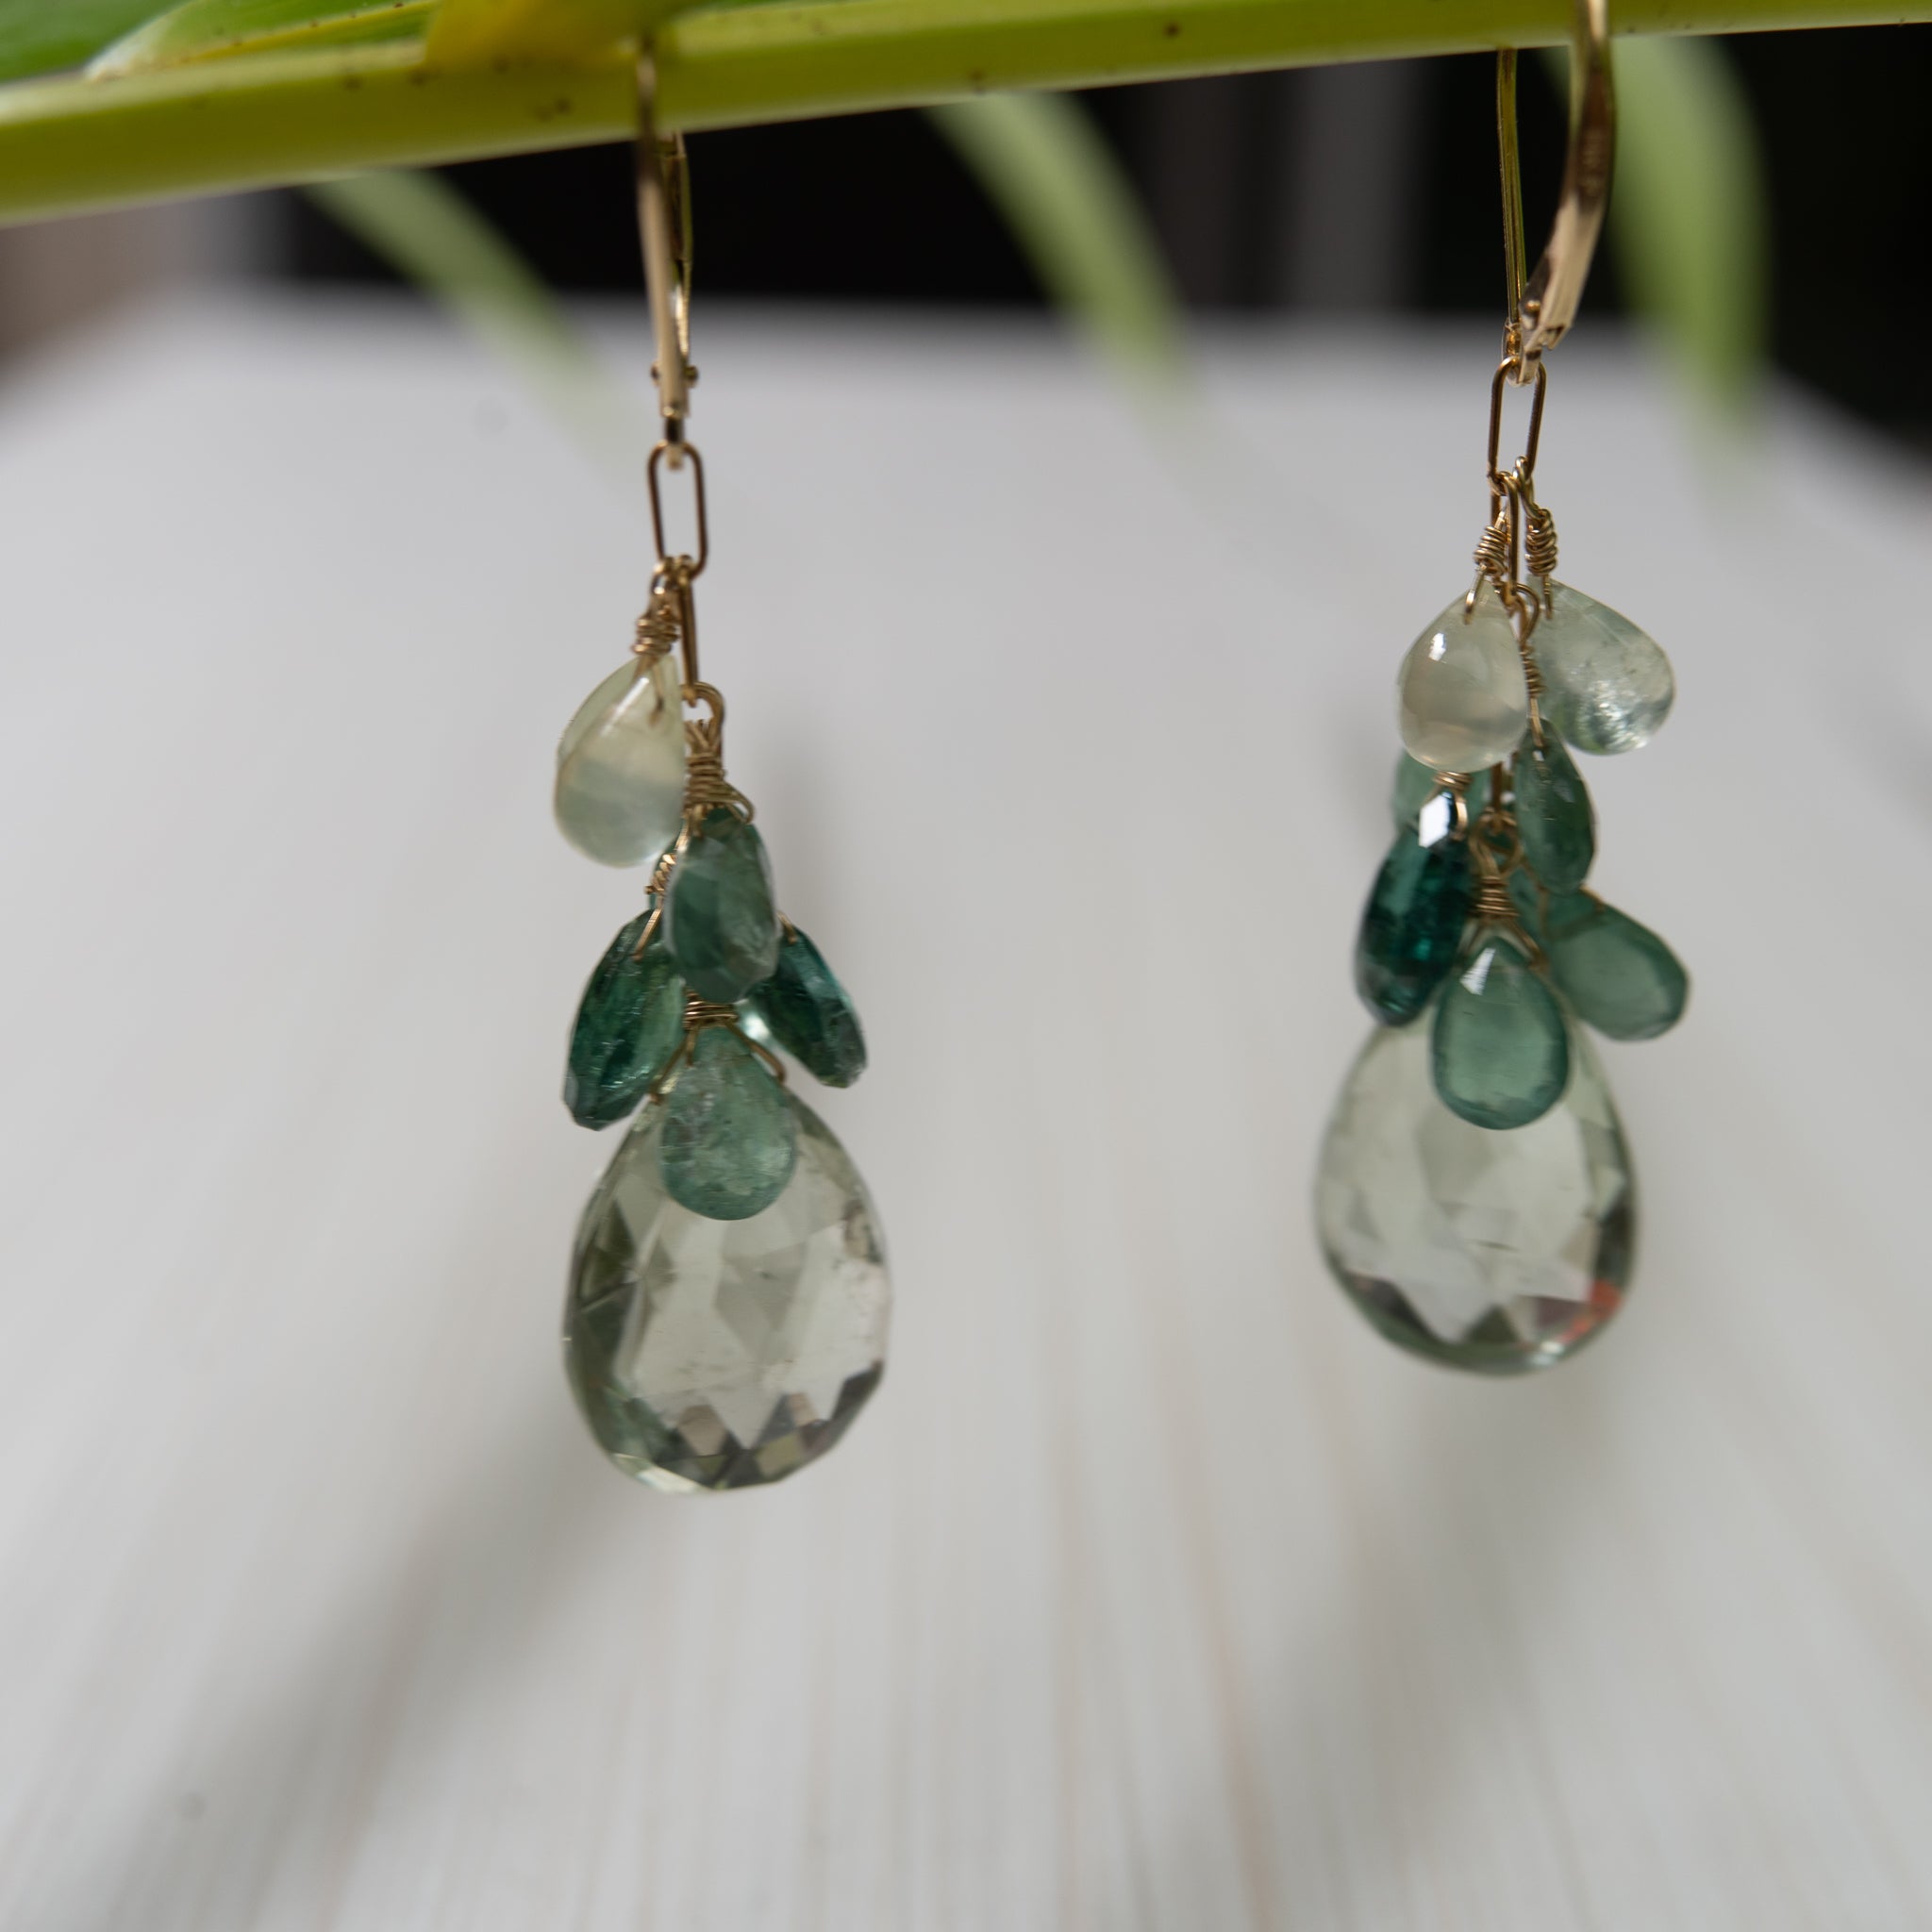 14K gold earrings with green gemstones, tourmaline and apatite, handmade in Hawaii , by eve black jewelry 